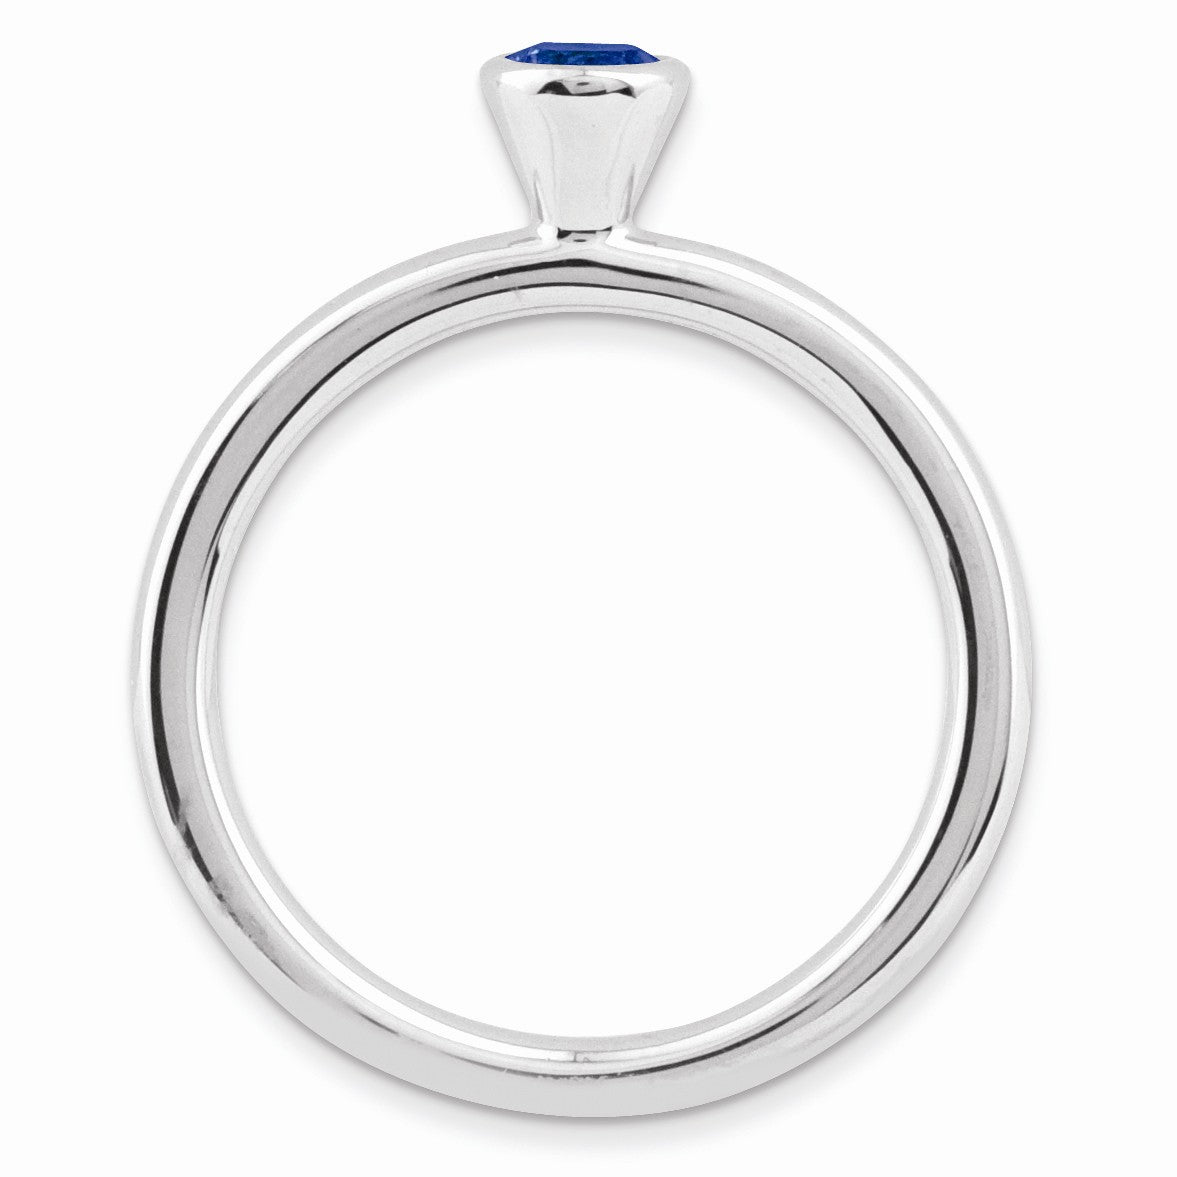 Alternate view of the Stackable High Profile 4mm Created Sapphire Silver Ring by The Black Bow Jewelry Co.